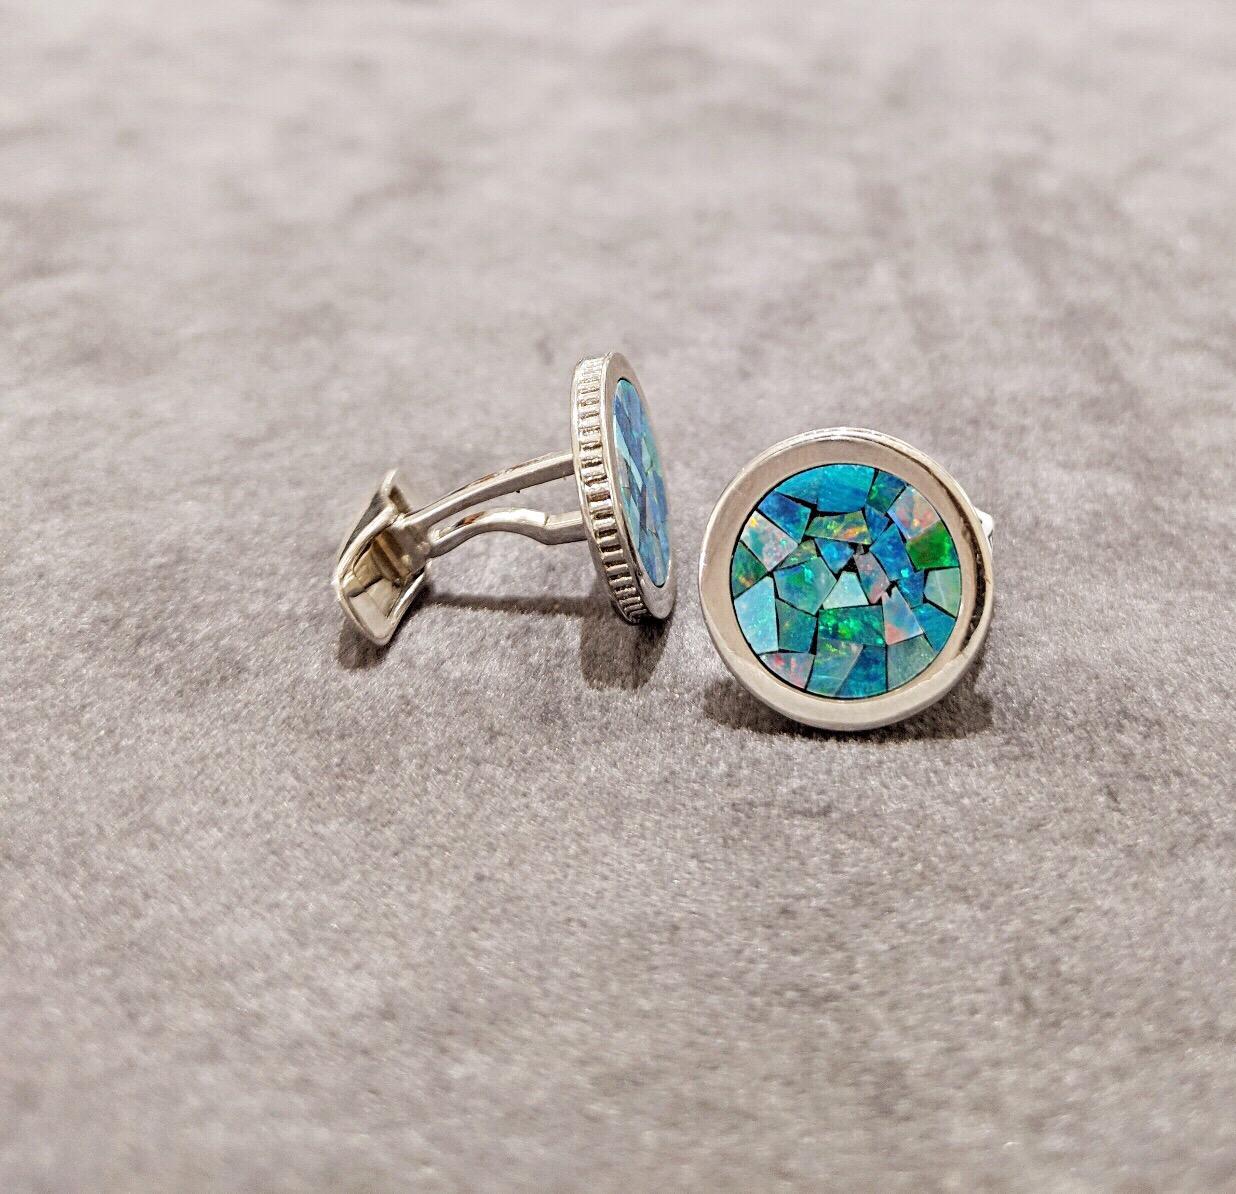 These magnificent 18 kt white gold round cuff links are inlaid with a beautiful opal mosaic pattern. The detailed coin edge further elevates the design. Stamped with the CELLINI logo, these stunning and unique cufflinks are sure to make a